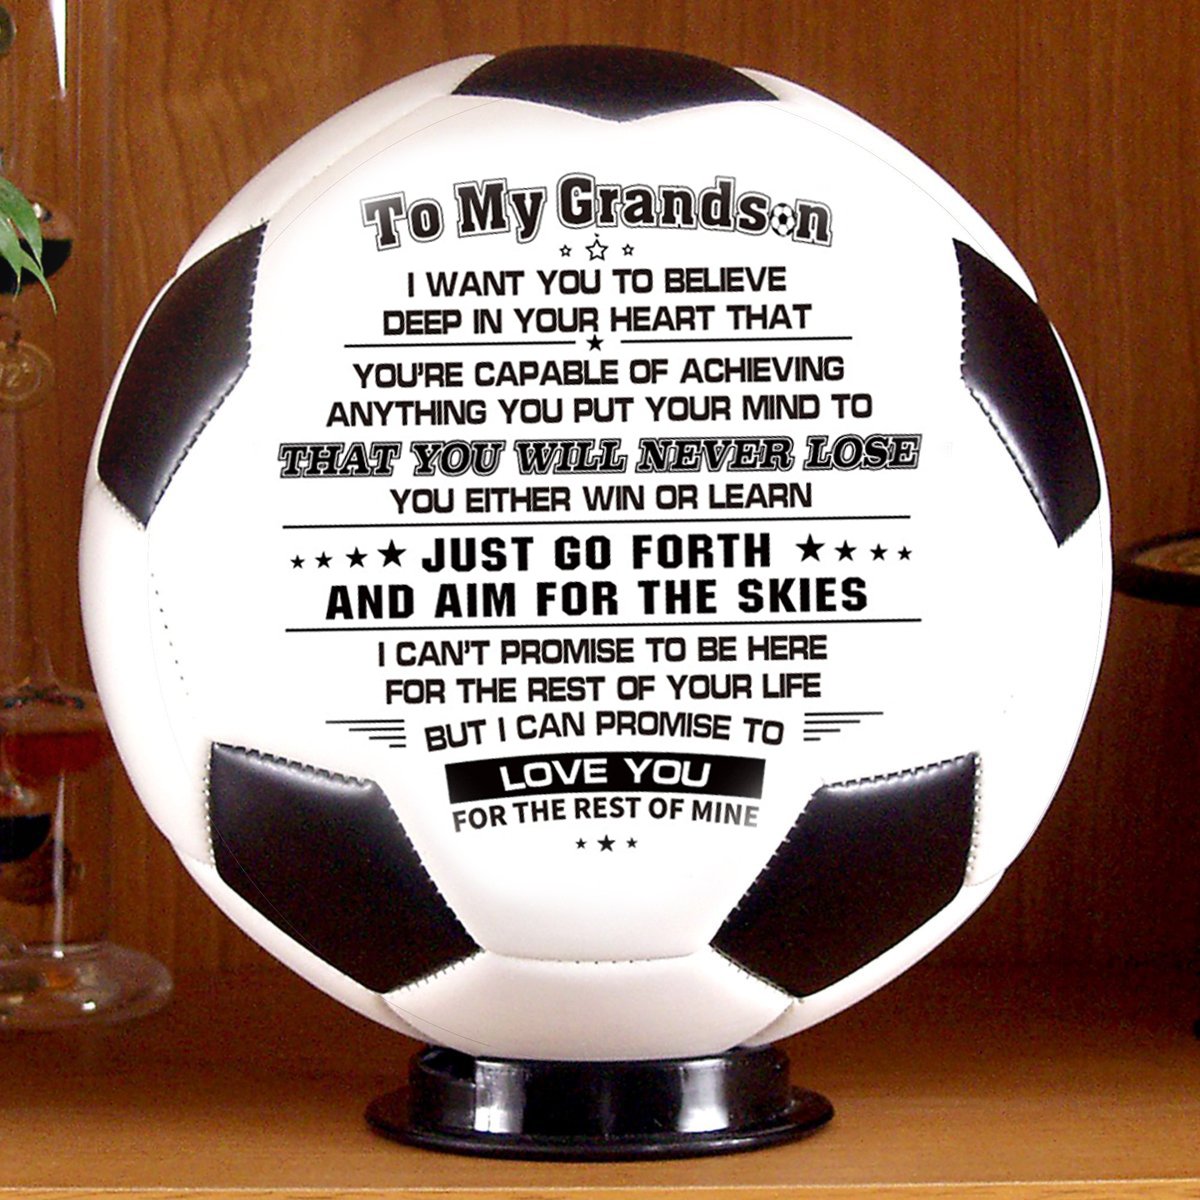 To My Grandson - I Love You - Soccer Ball